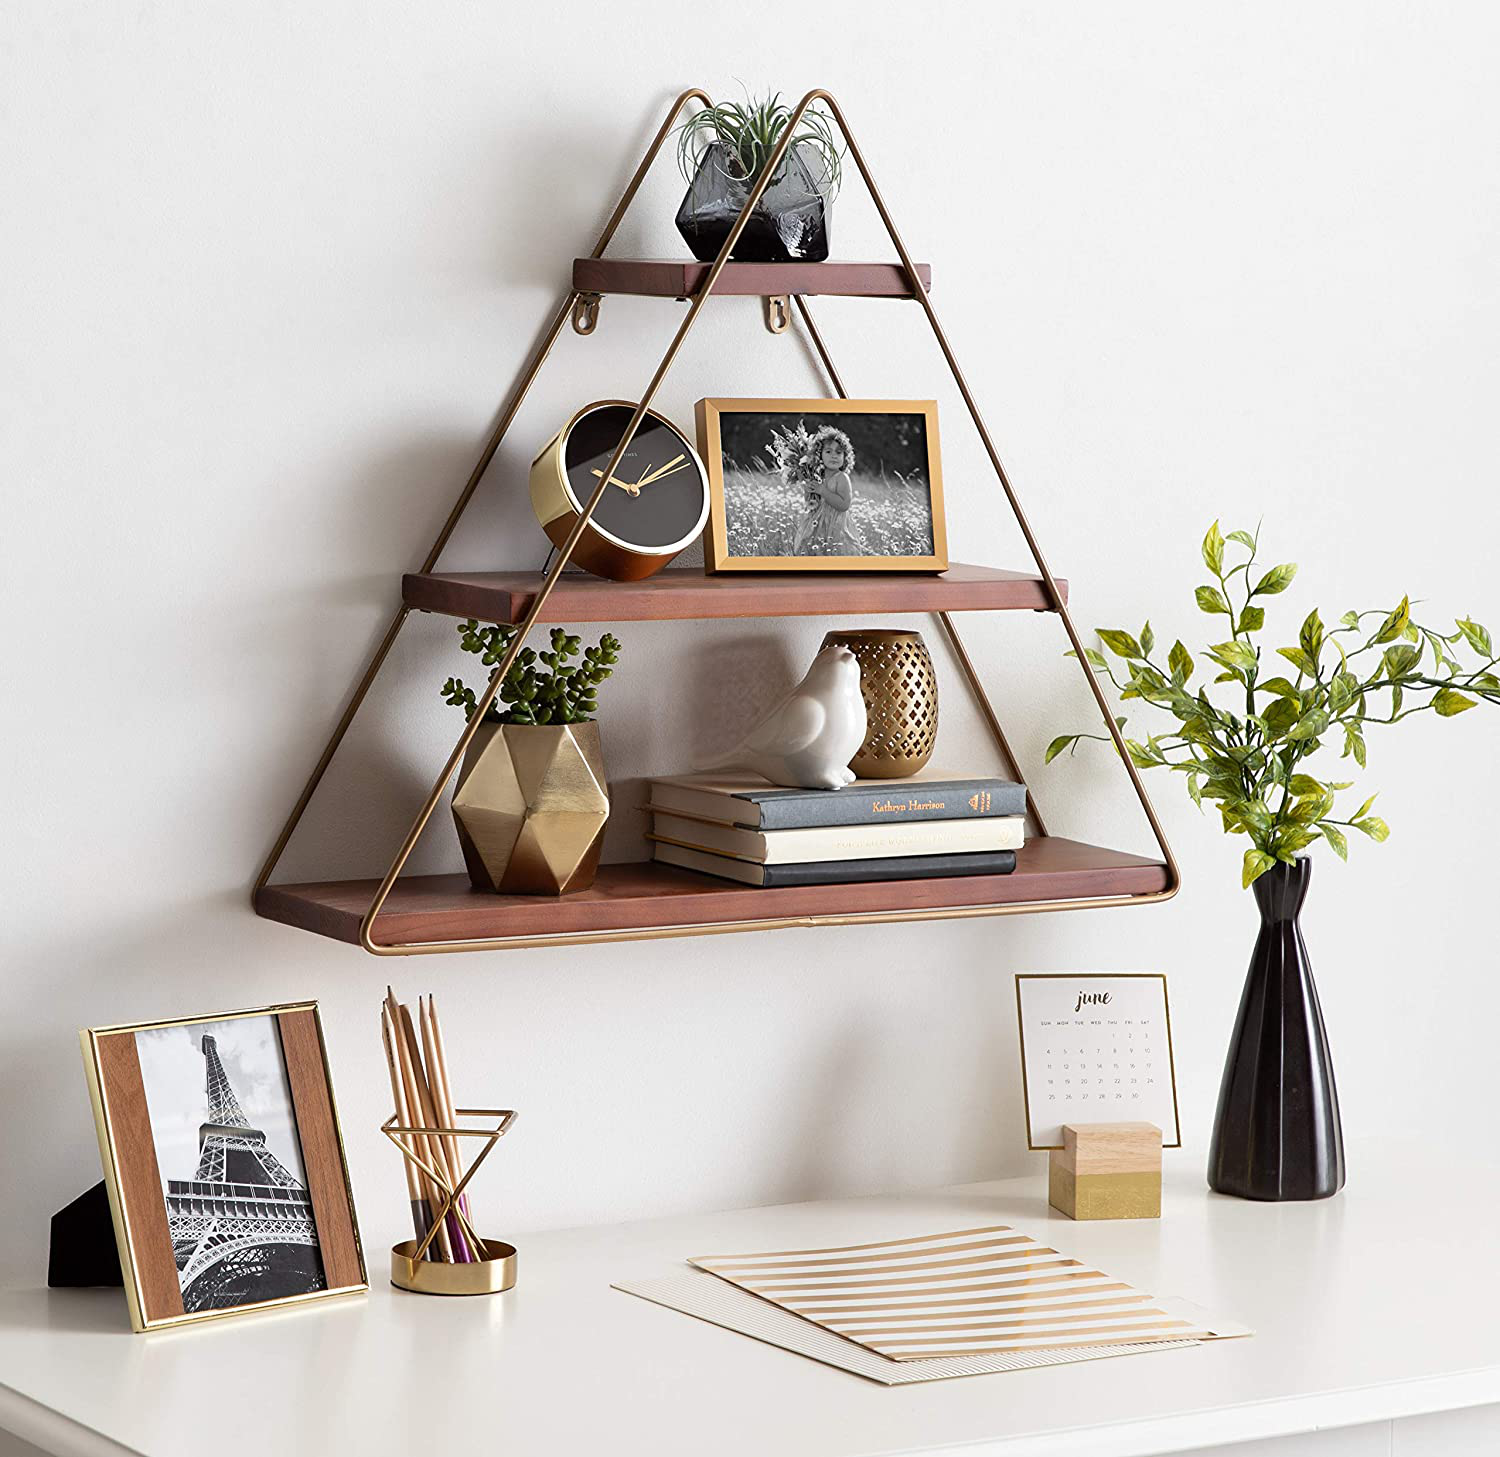 https://www.ekrhome.com/tilde-small-three-tiered-triangle-floating-metal-wall-shelf-walnut-brown-and-gold-product/